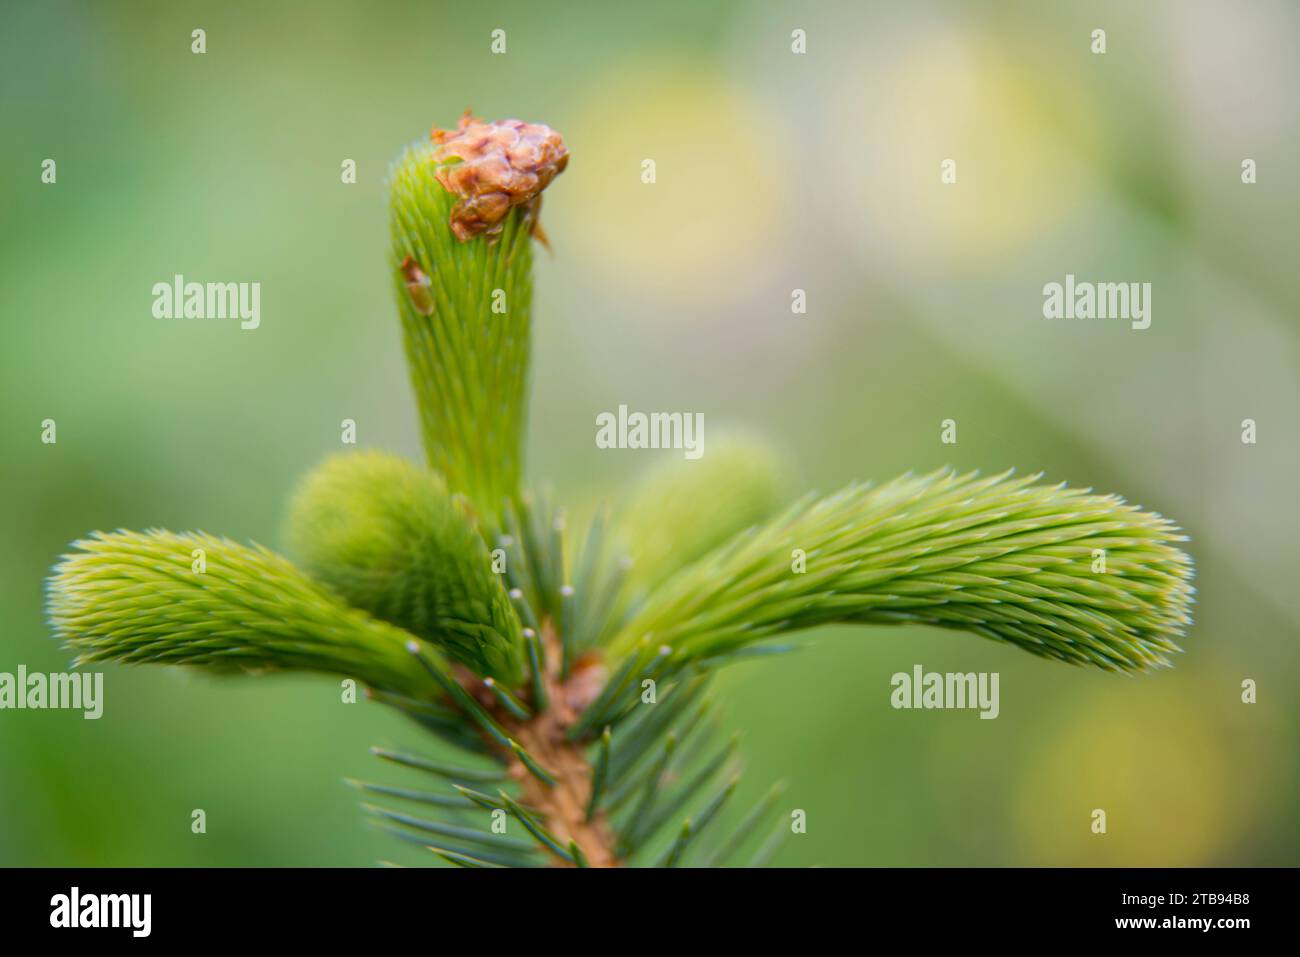 Extreme close-up of a new shoot of a Sitka Spruce tree (Picea sitchensis), Inside Passage, Alaska, USA; Alaska, United States of America Stock Photo